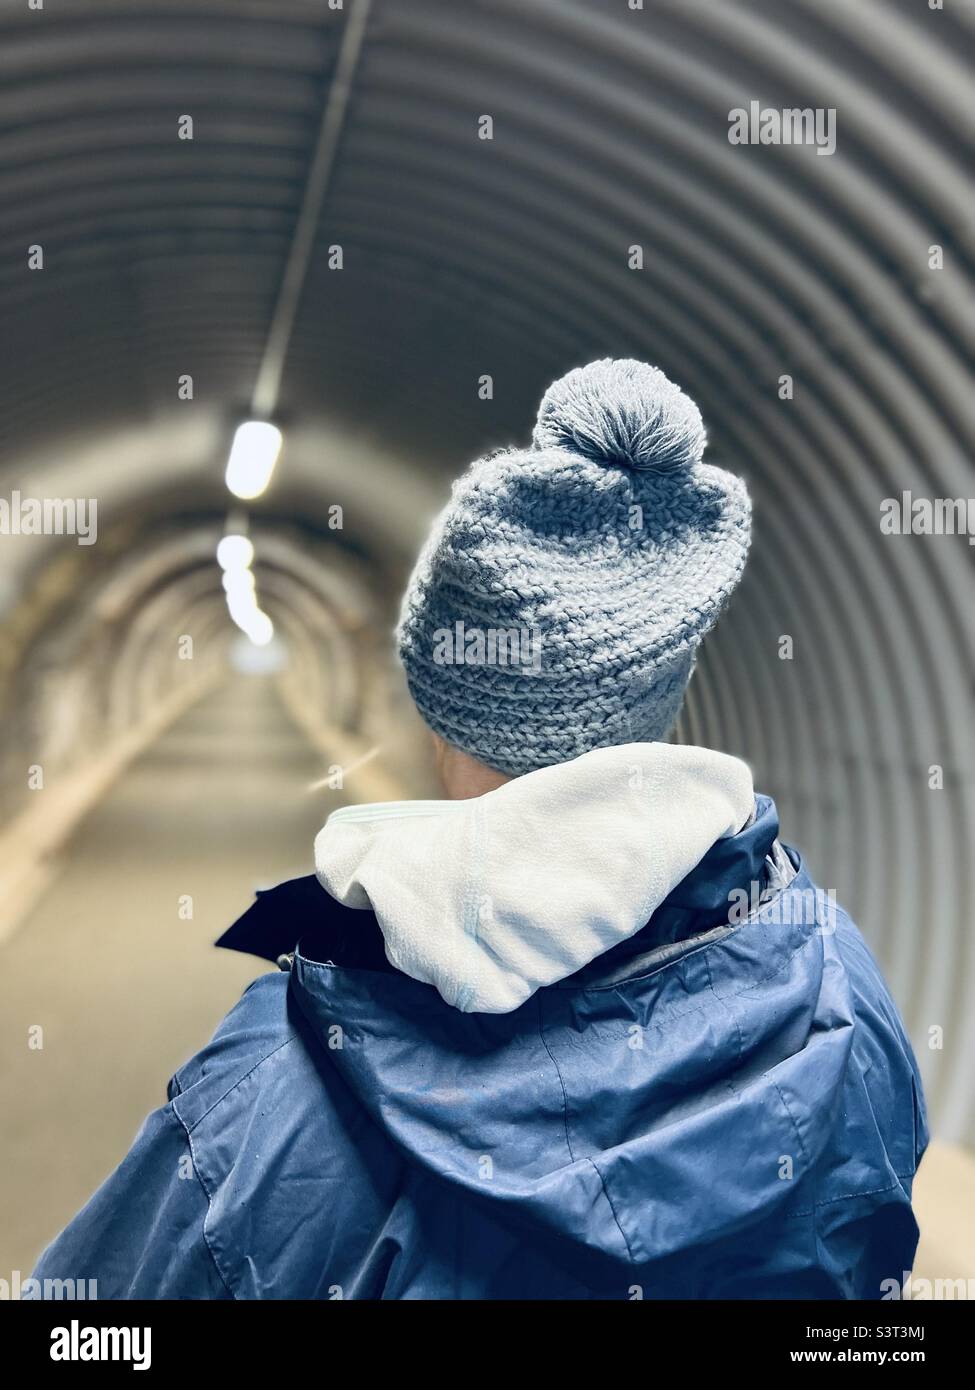 Rear view of woman wearing a knit hat walking in a tunnel Stock Photo